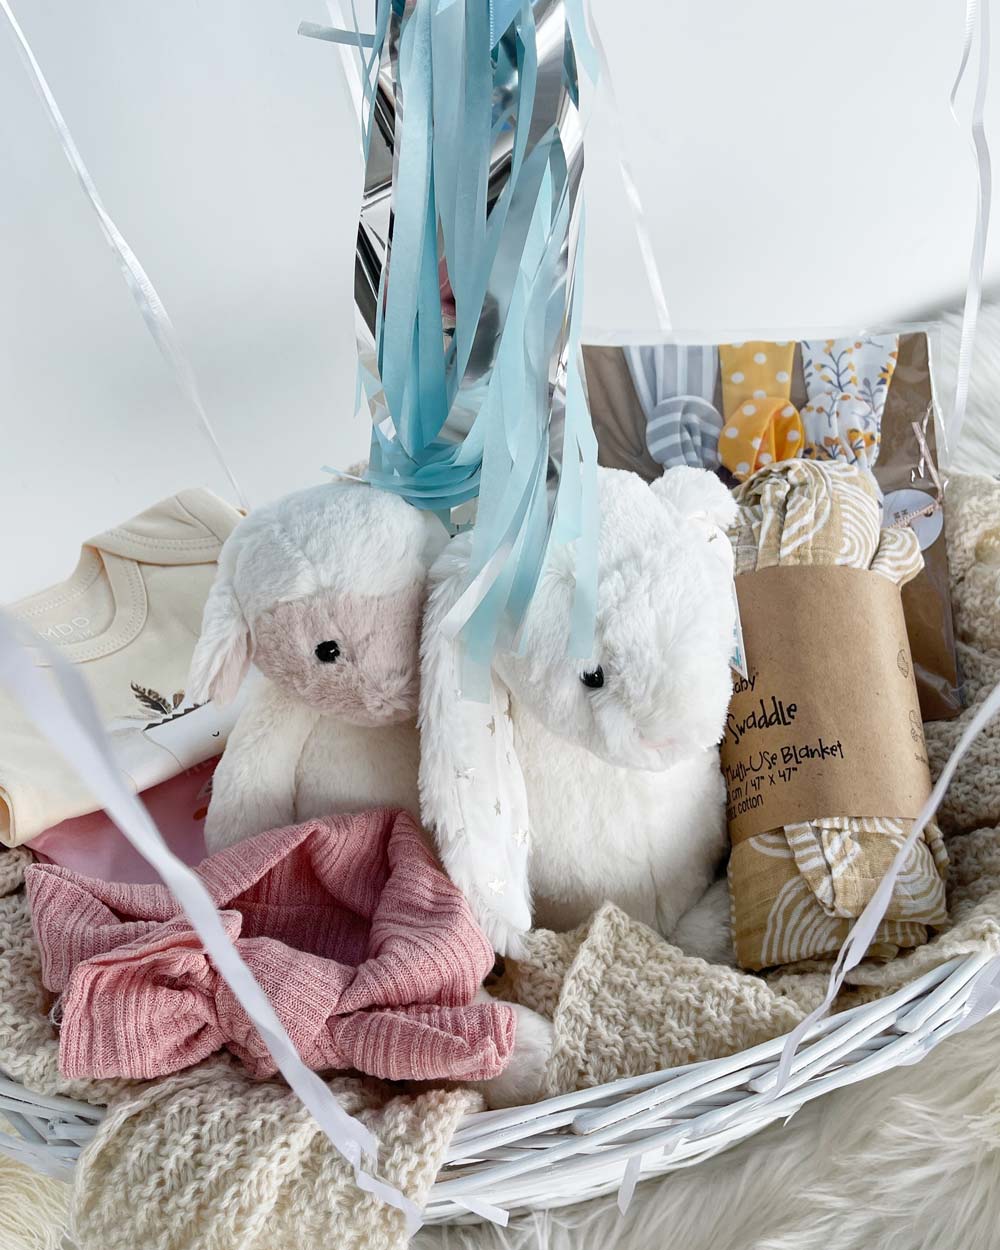 Jellycat Gift Hamper Hot Air Balloon with basket